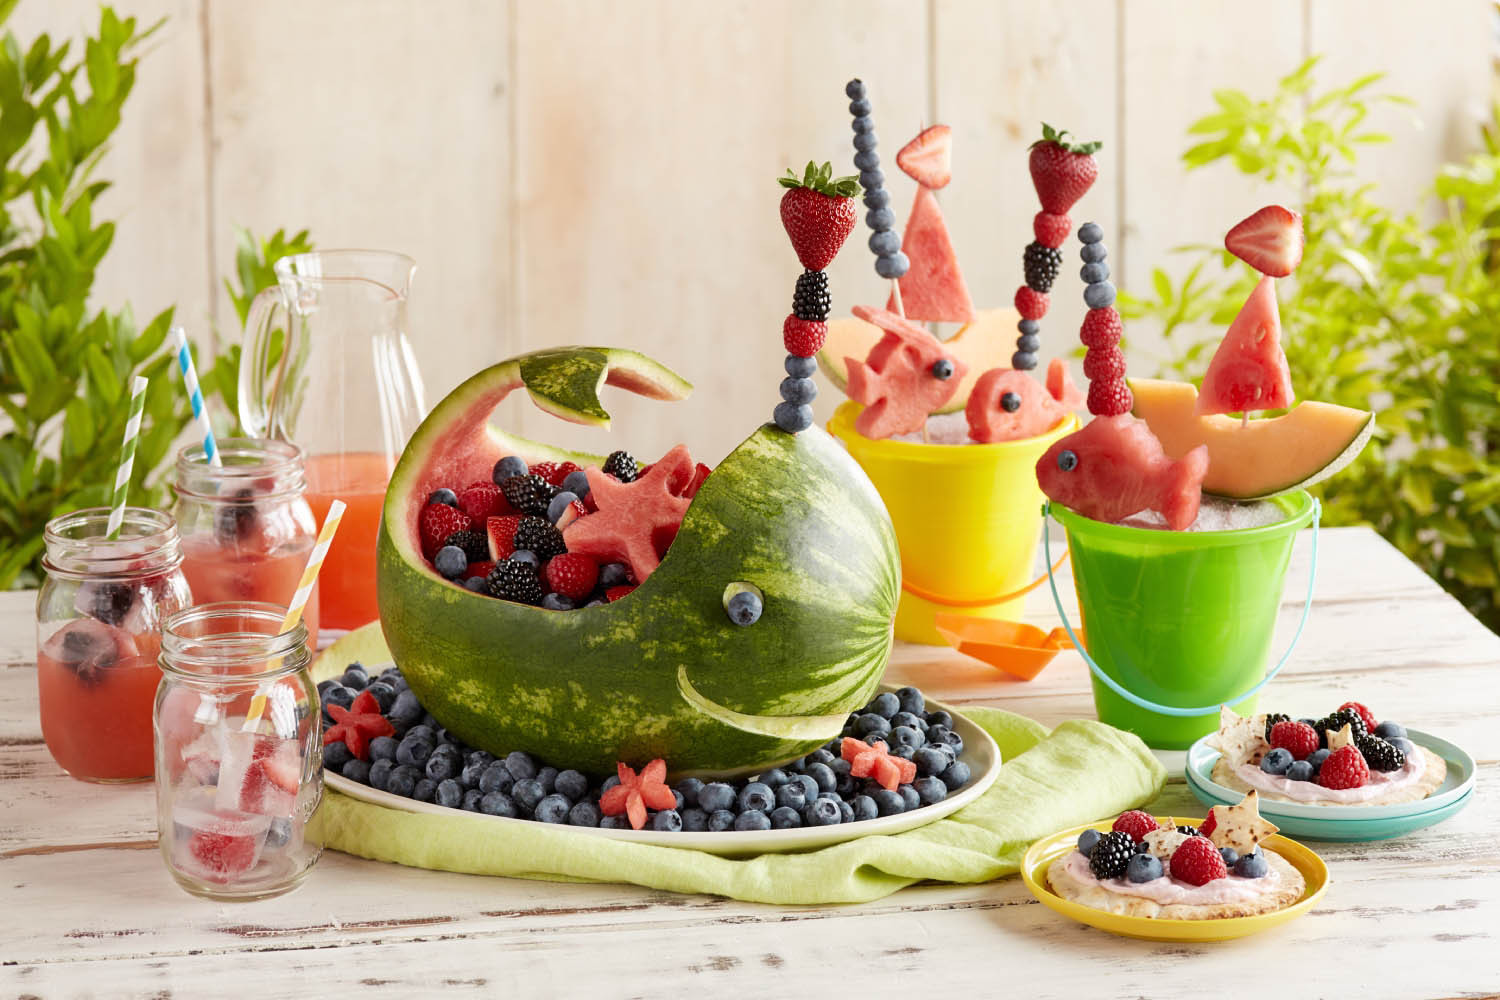 Summer Beach Party Food Ideas
 Splash into Summer with a Berry Beach Party